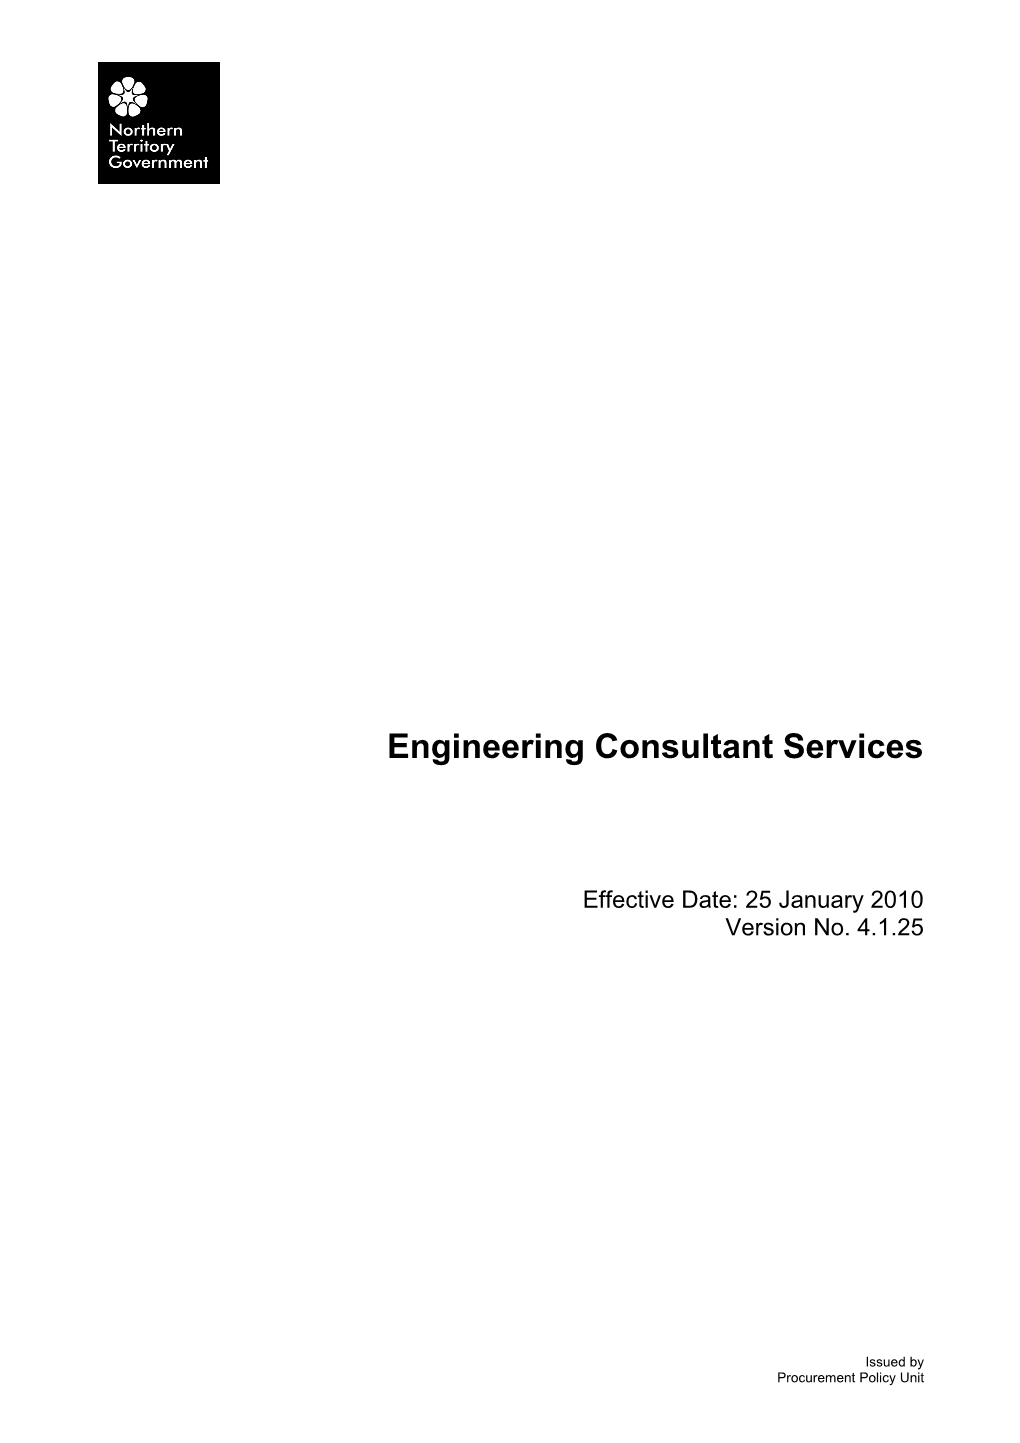 Engineering Consultant Services - V 4.1.25 (25 January 2010)